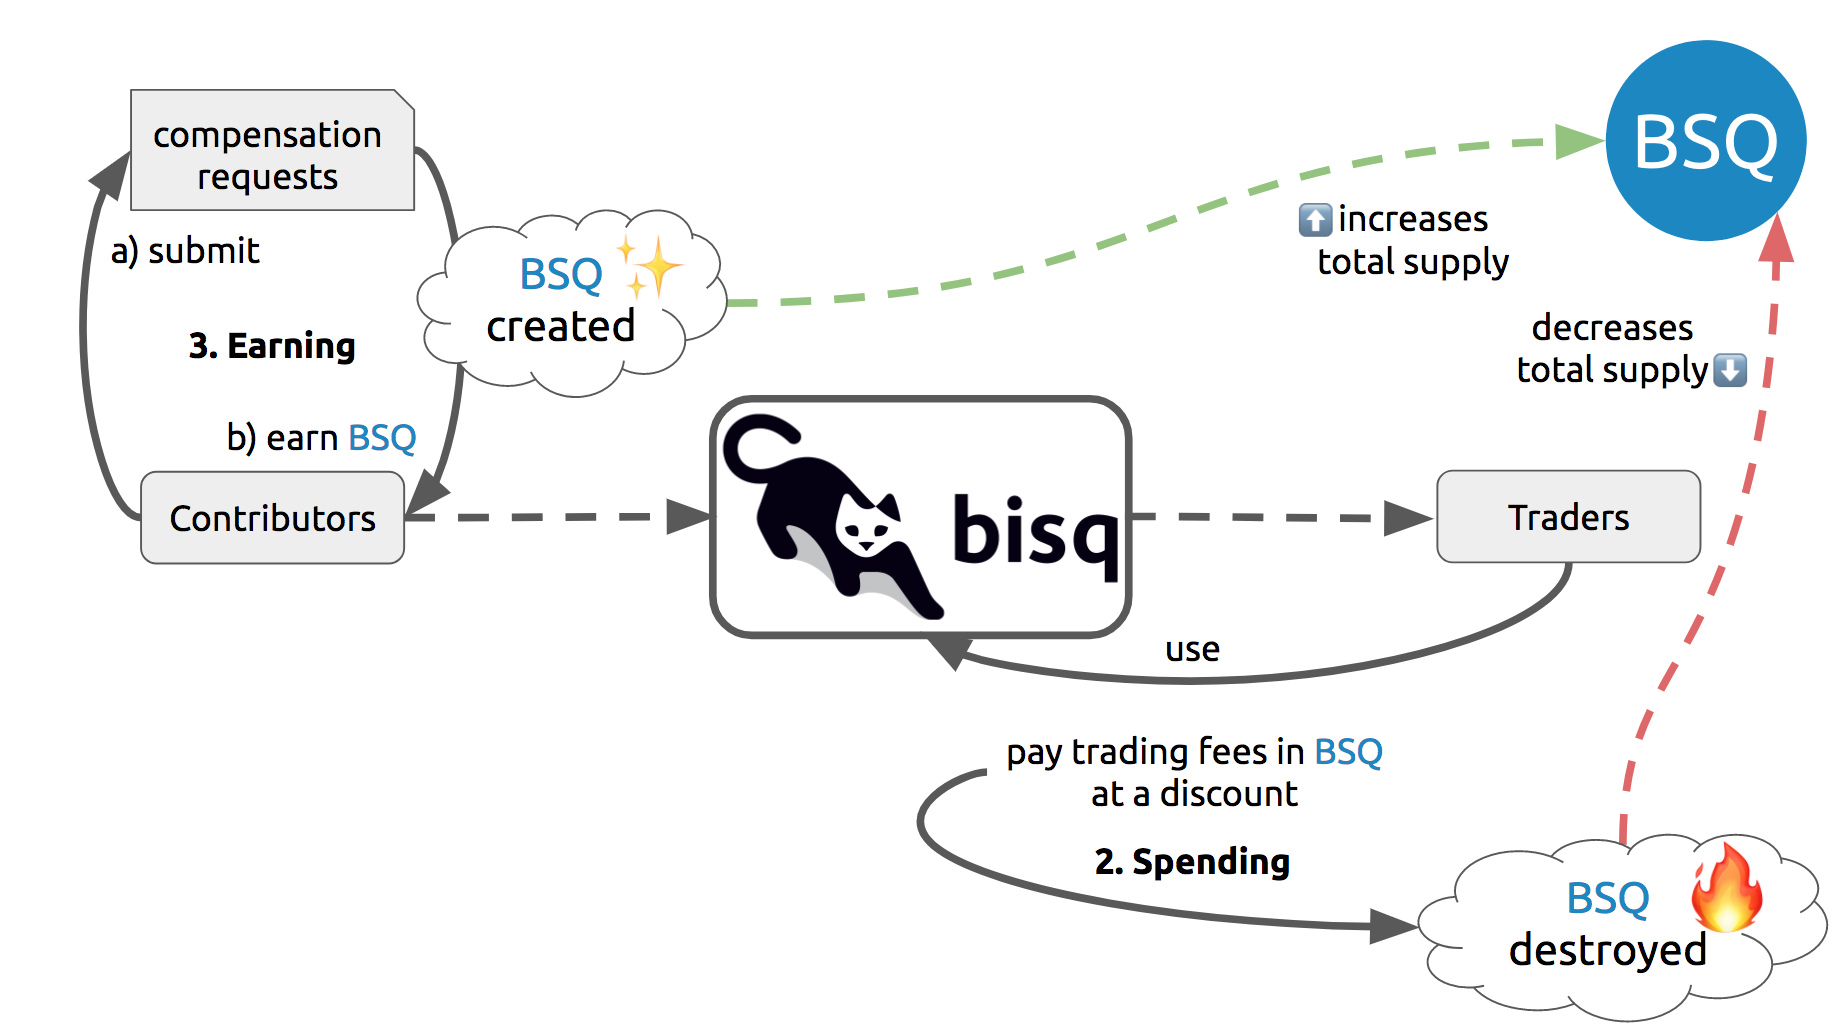 How BSQ is issued and destroyed